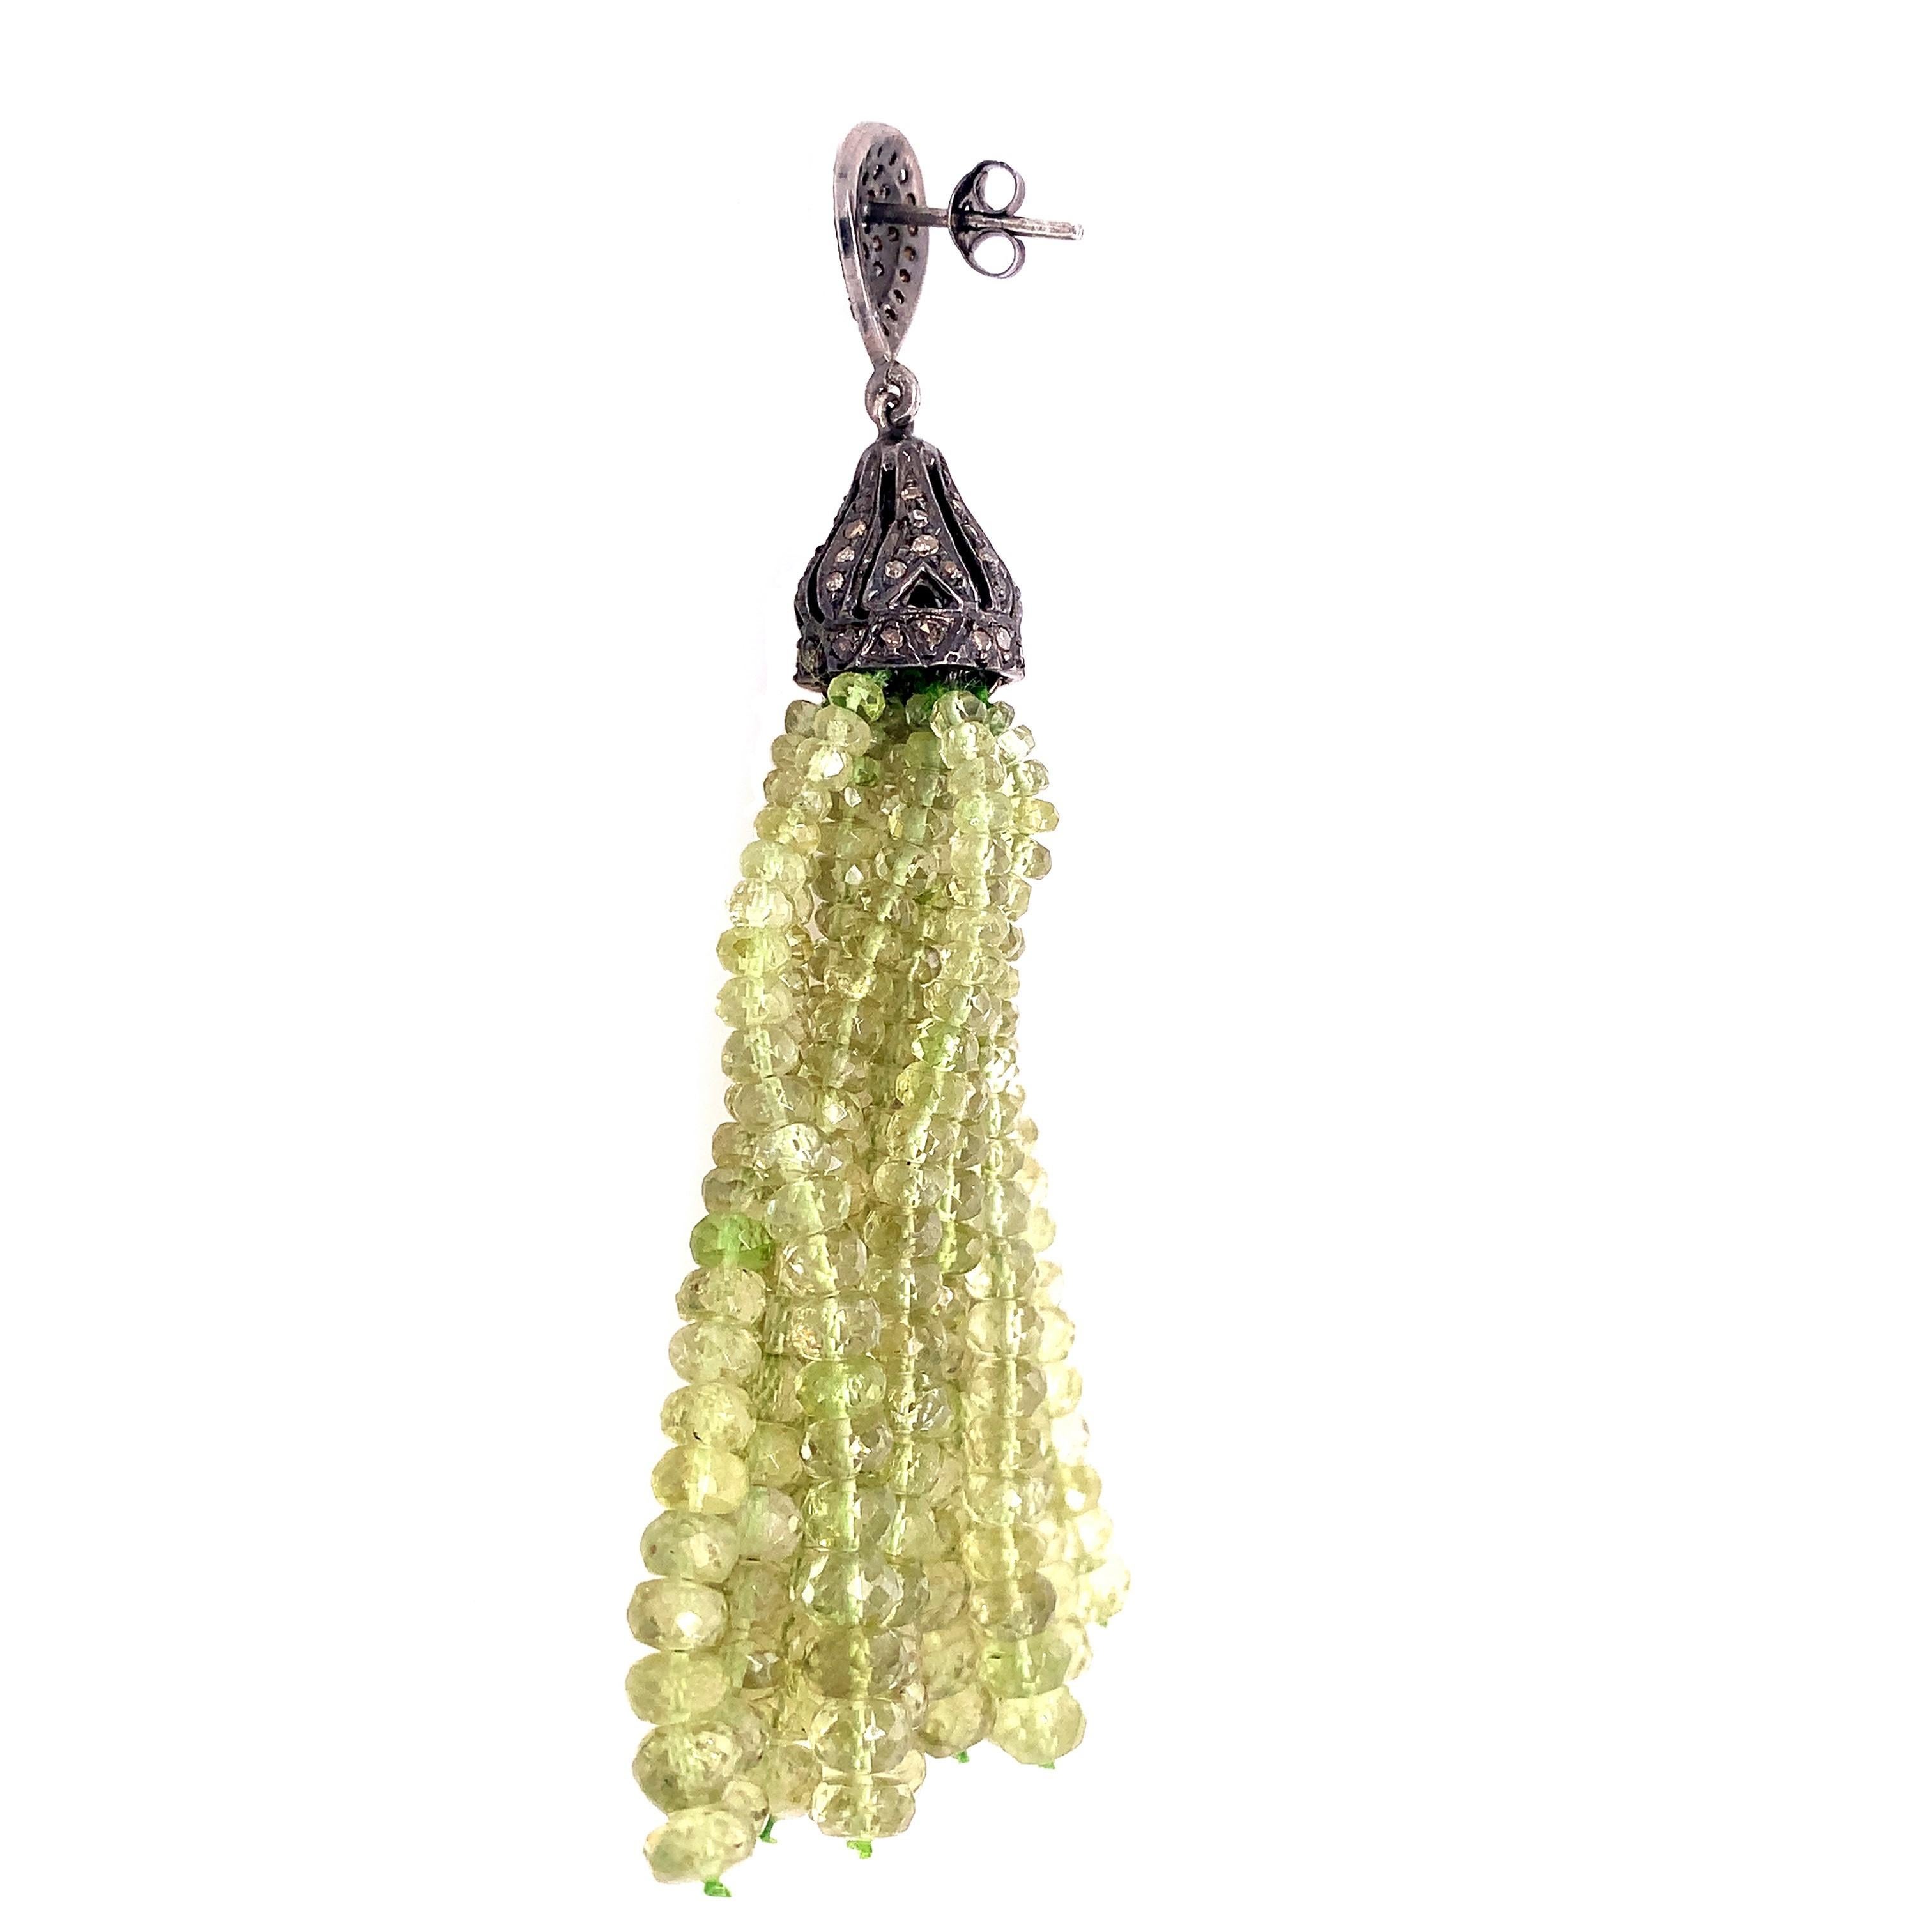 Life in color Collection

Peridot beads featured tassel dangling from a crown cup set with Rustic Diamonds in Sterling Silver.

Peridot: 210.52ct total weight.
Diamond: 1.78ct total weight.